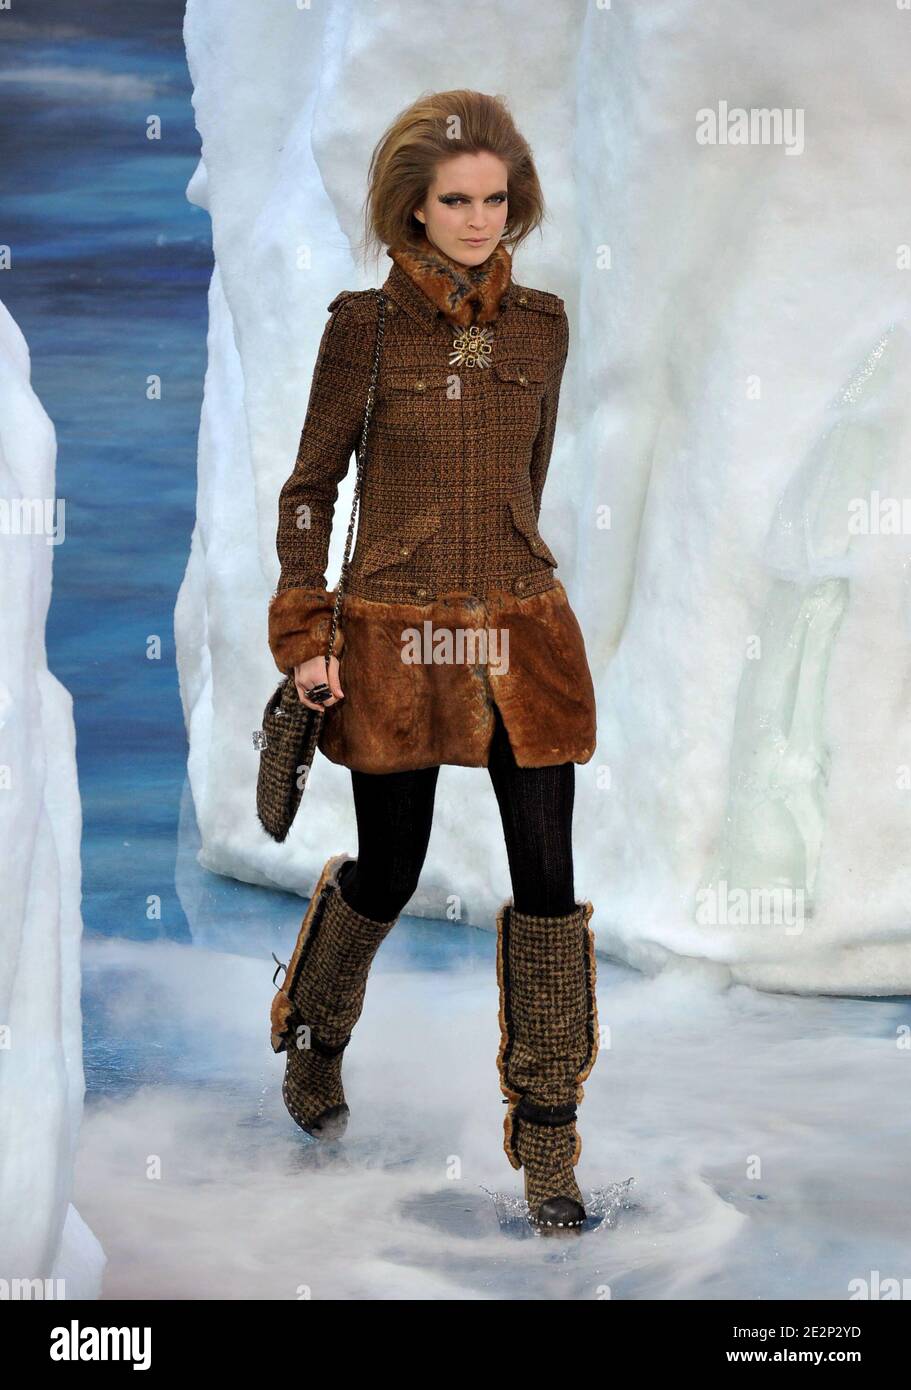 Designer Karl Lagerfeld appears during Chanel Fall-Winter 2009/2010  ready-to-wear collection show held at the Grand Palais in Paris, France on  March 10, 2009. Photo by Thierry Orban/ABACAPRESS.COM Stock Photo - Alamy